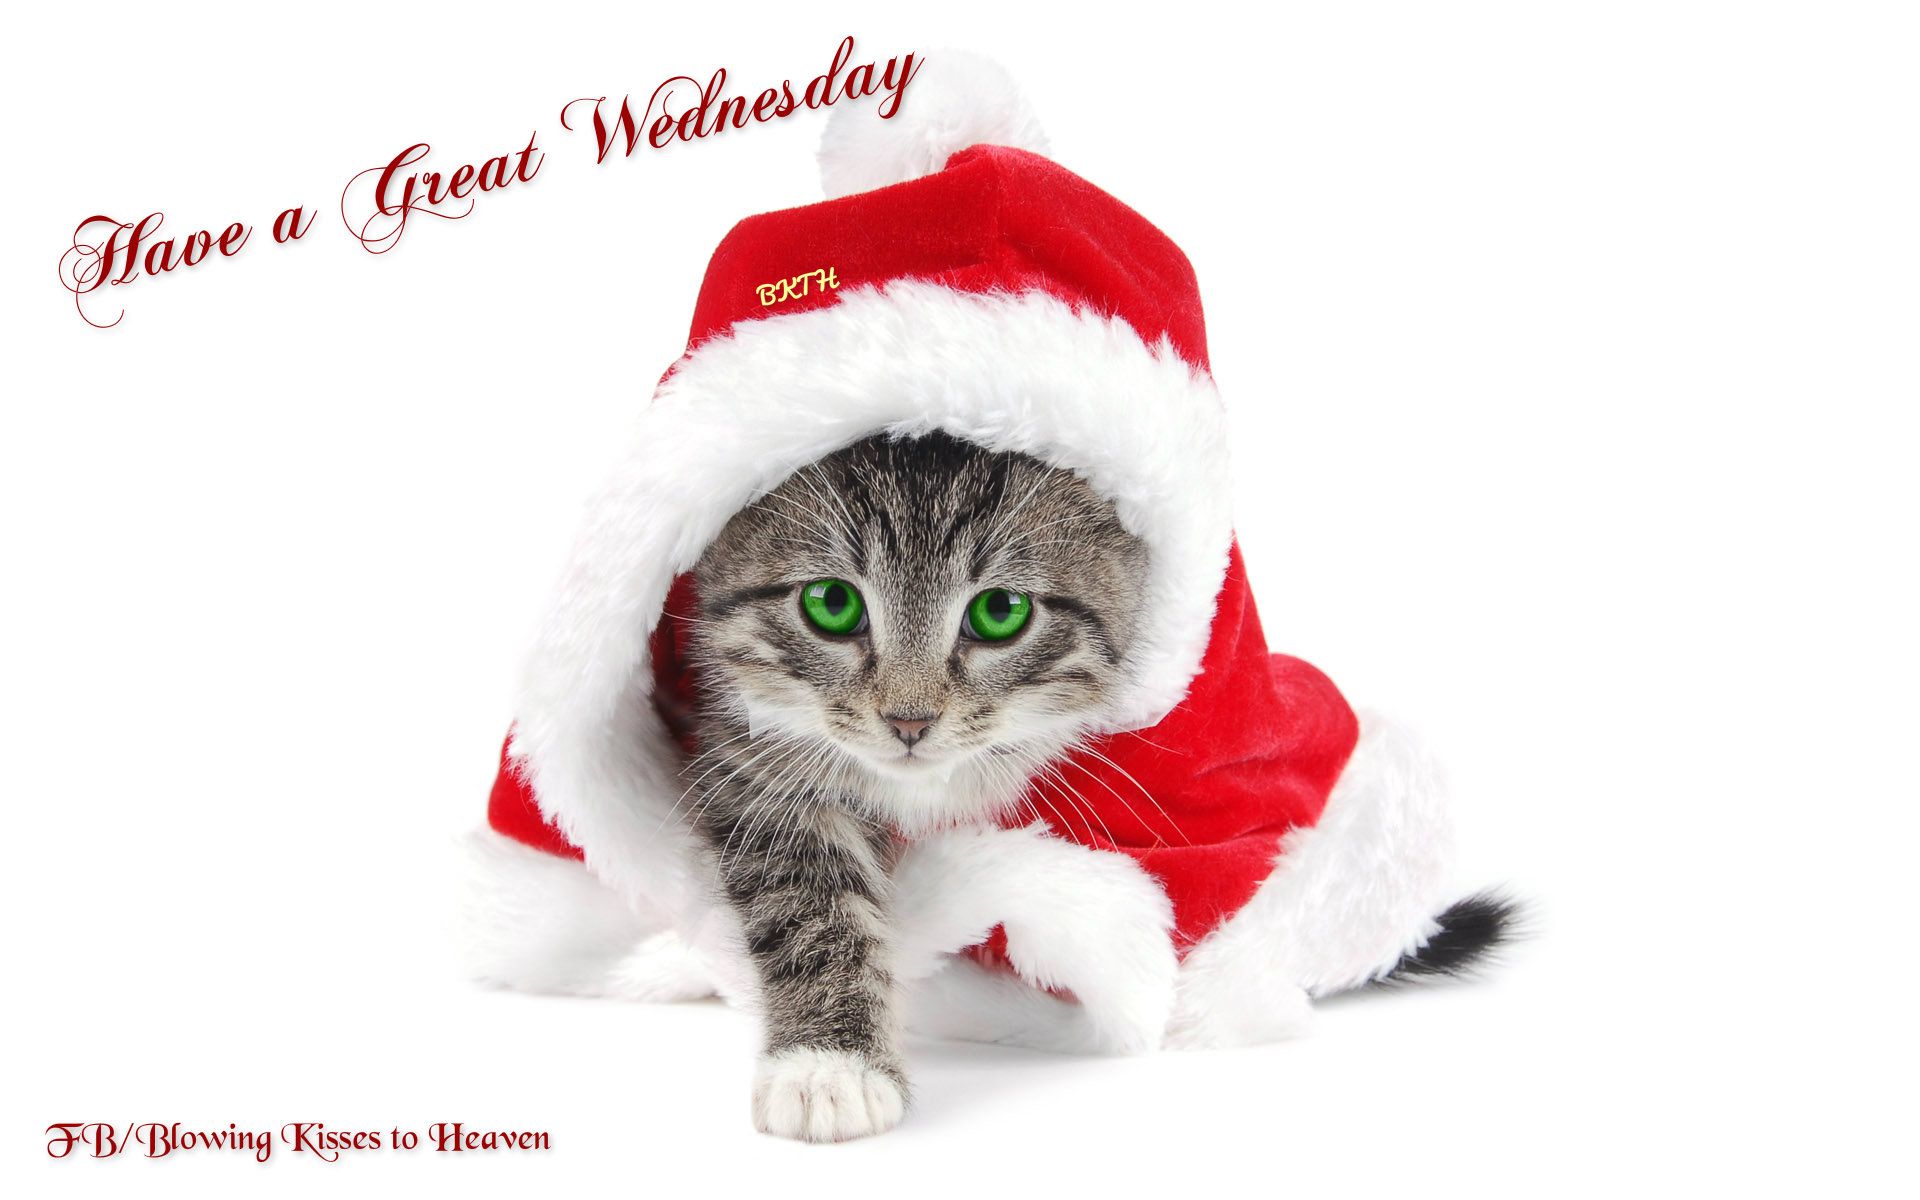 Have a great Wednesday With images Christmas kitten Christmas